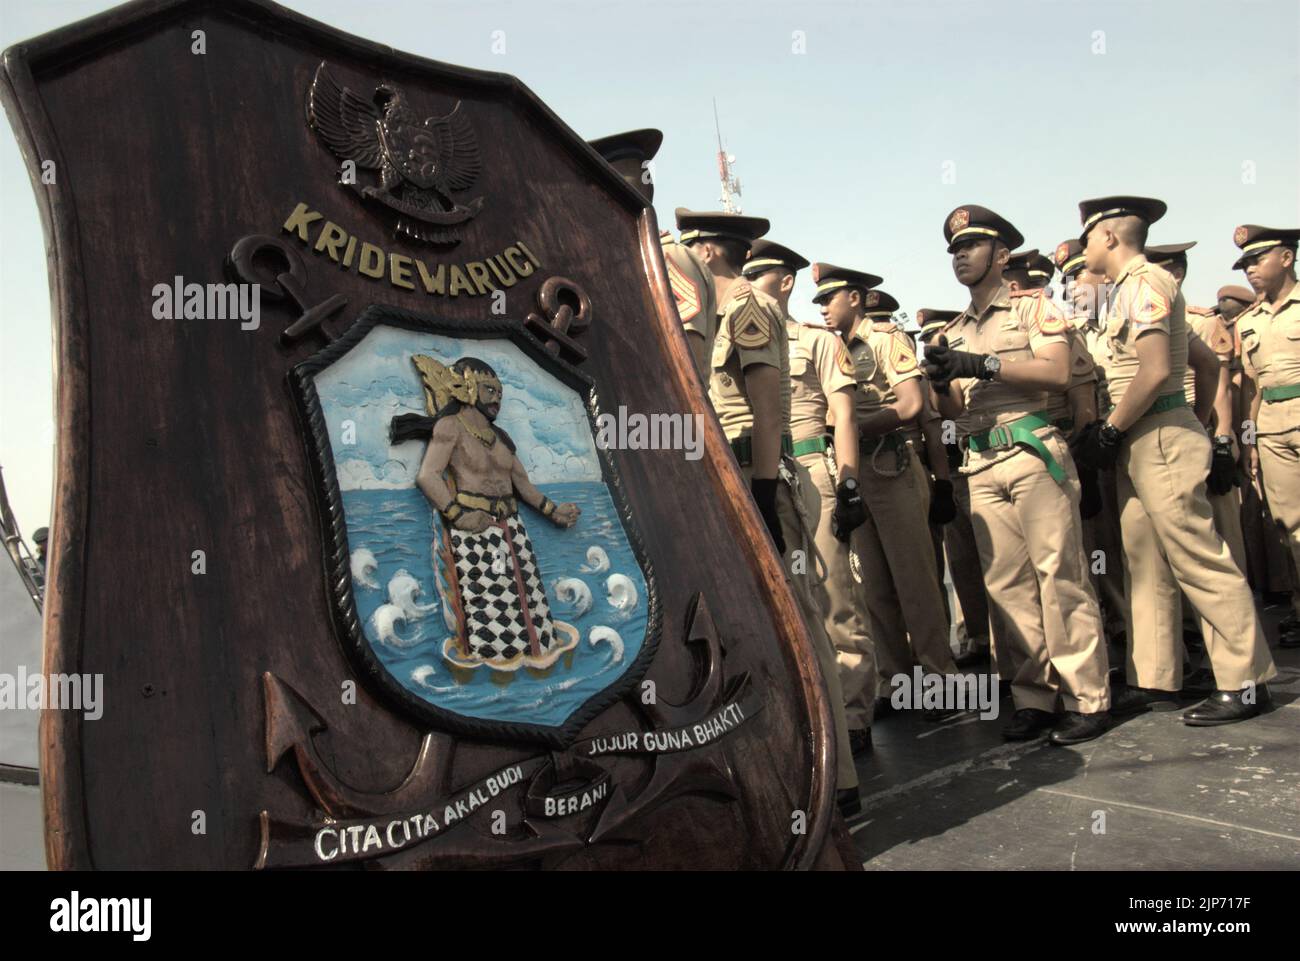 Indonesian navy cadets queueing to walk on the ladder to get onto KRI Dewaruci (Dewa Ruci), an Indonesian tall ship, as the barquentine type schooner is opened for public visitors at Kolinlamil harbour (Navy harbour) in Tanjung Priok, North Jakarta, Jakarta, Indonesia. Stock Photo